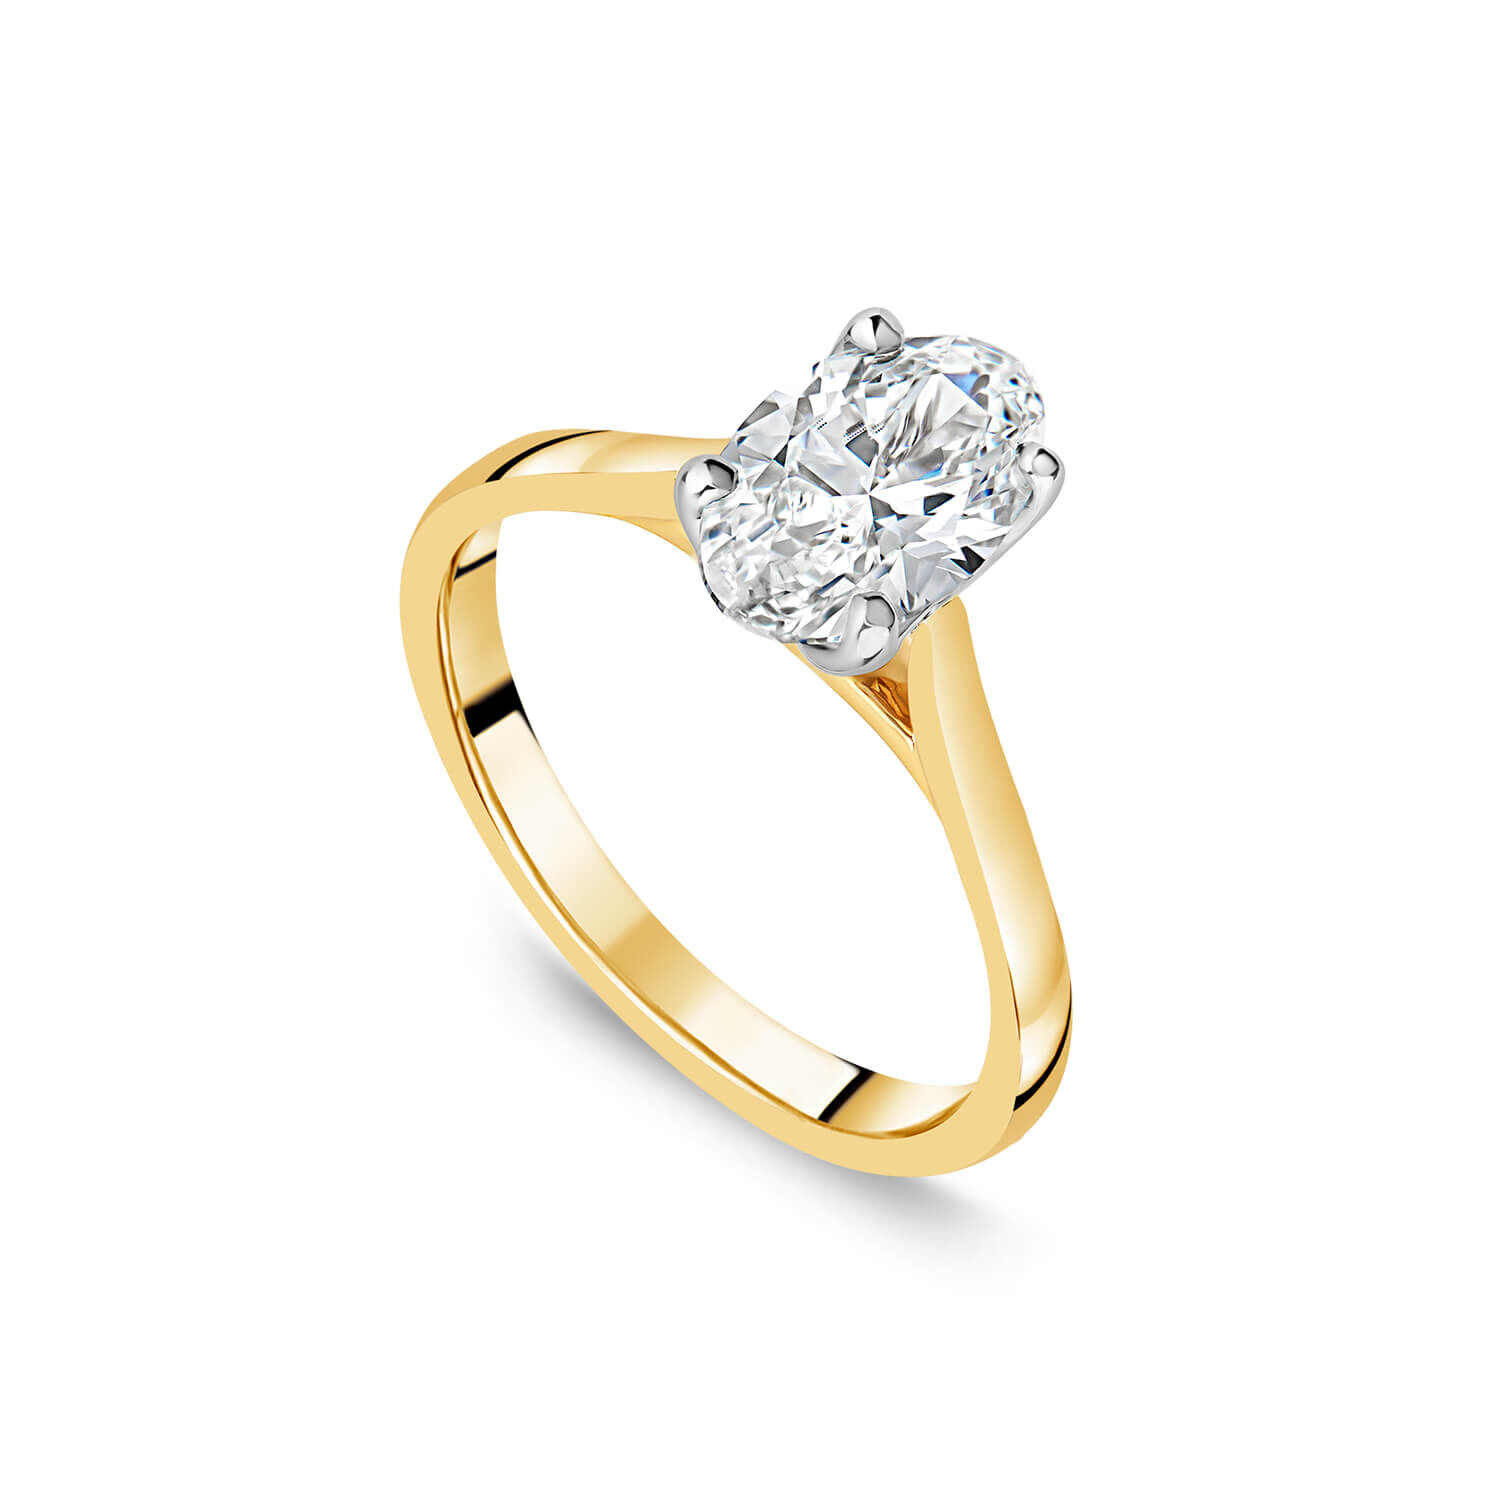 J'adore Solitaire Ring – Appleby Jewellers Dublin